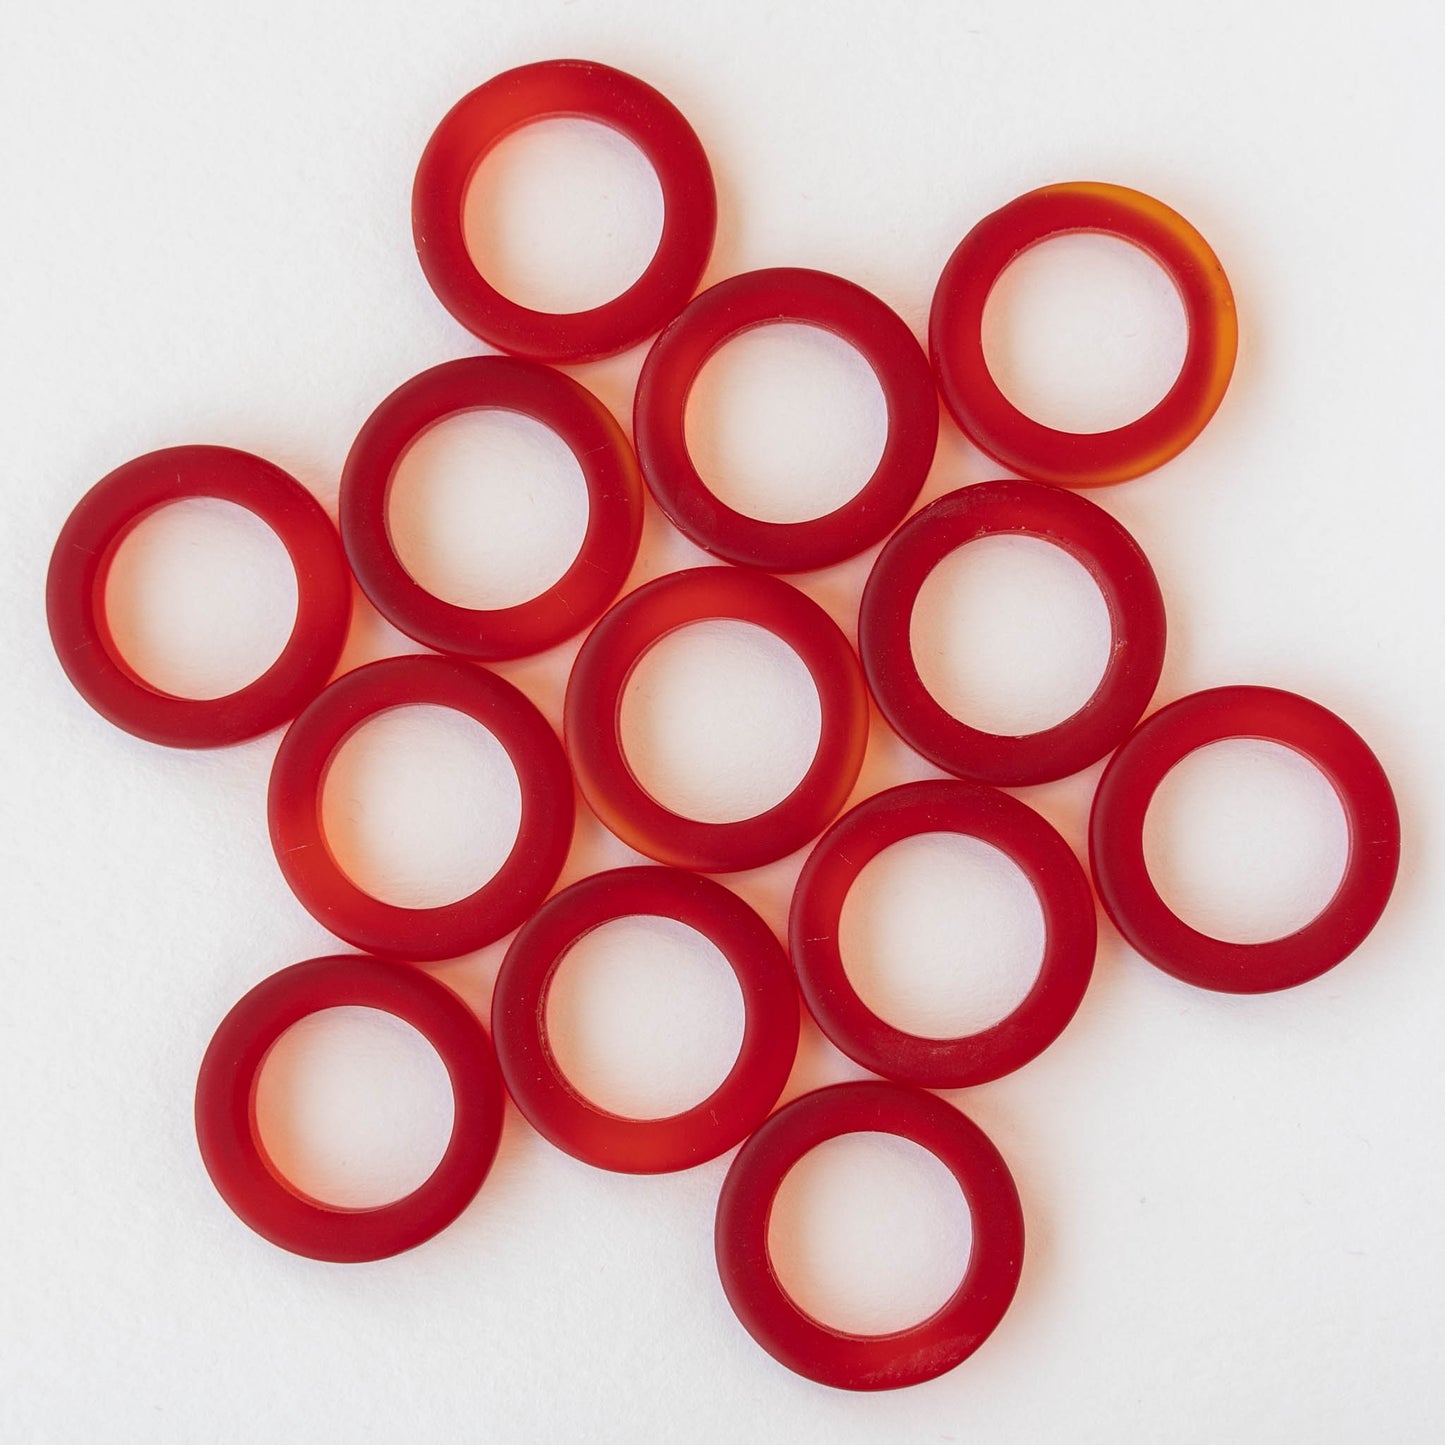 23mm Frosted Glass Rings - Red - 2 or 10